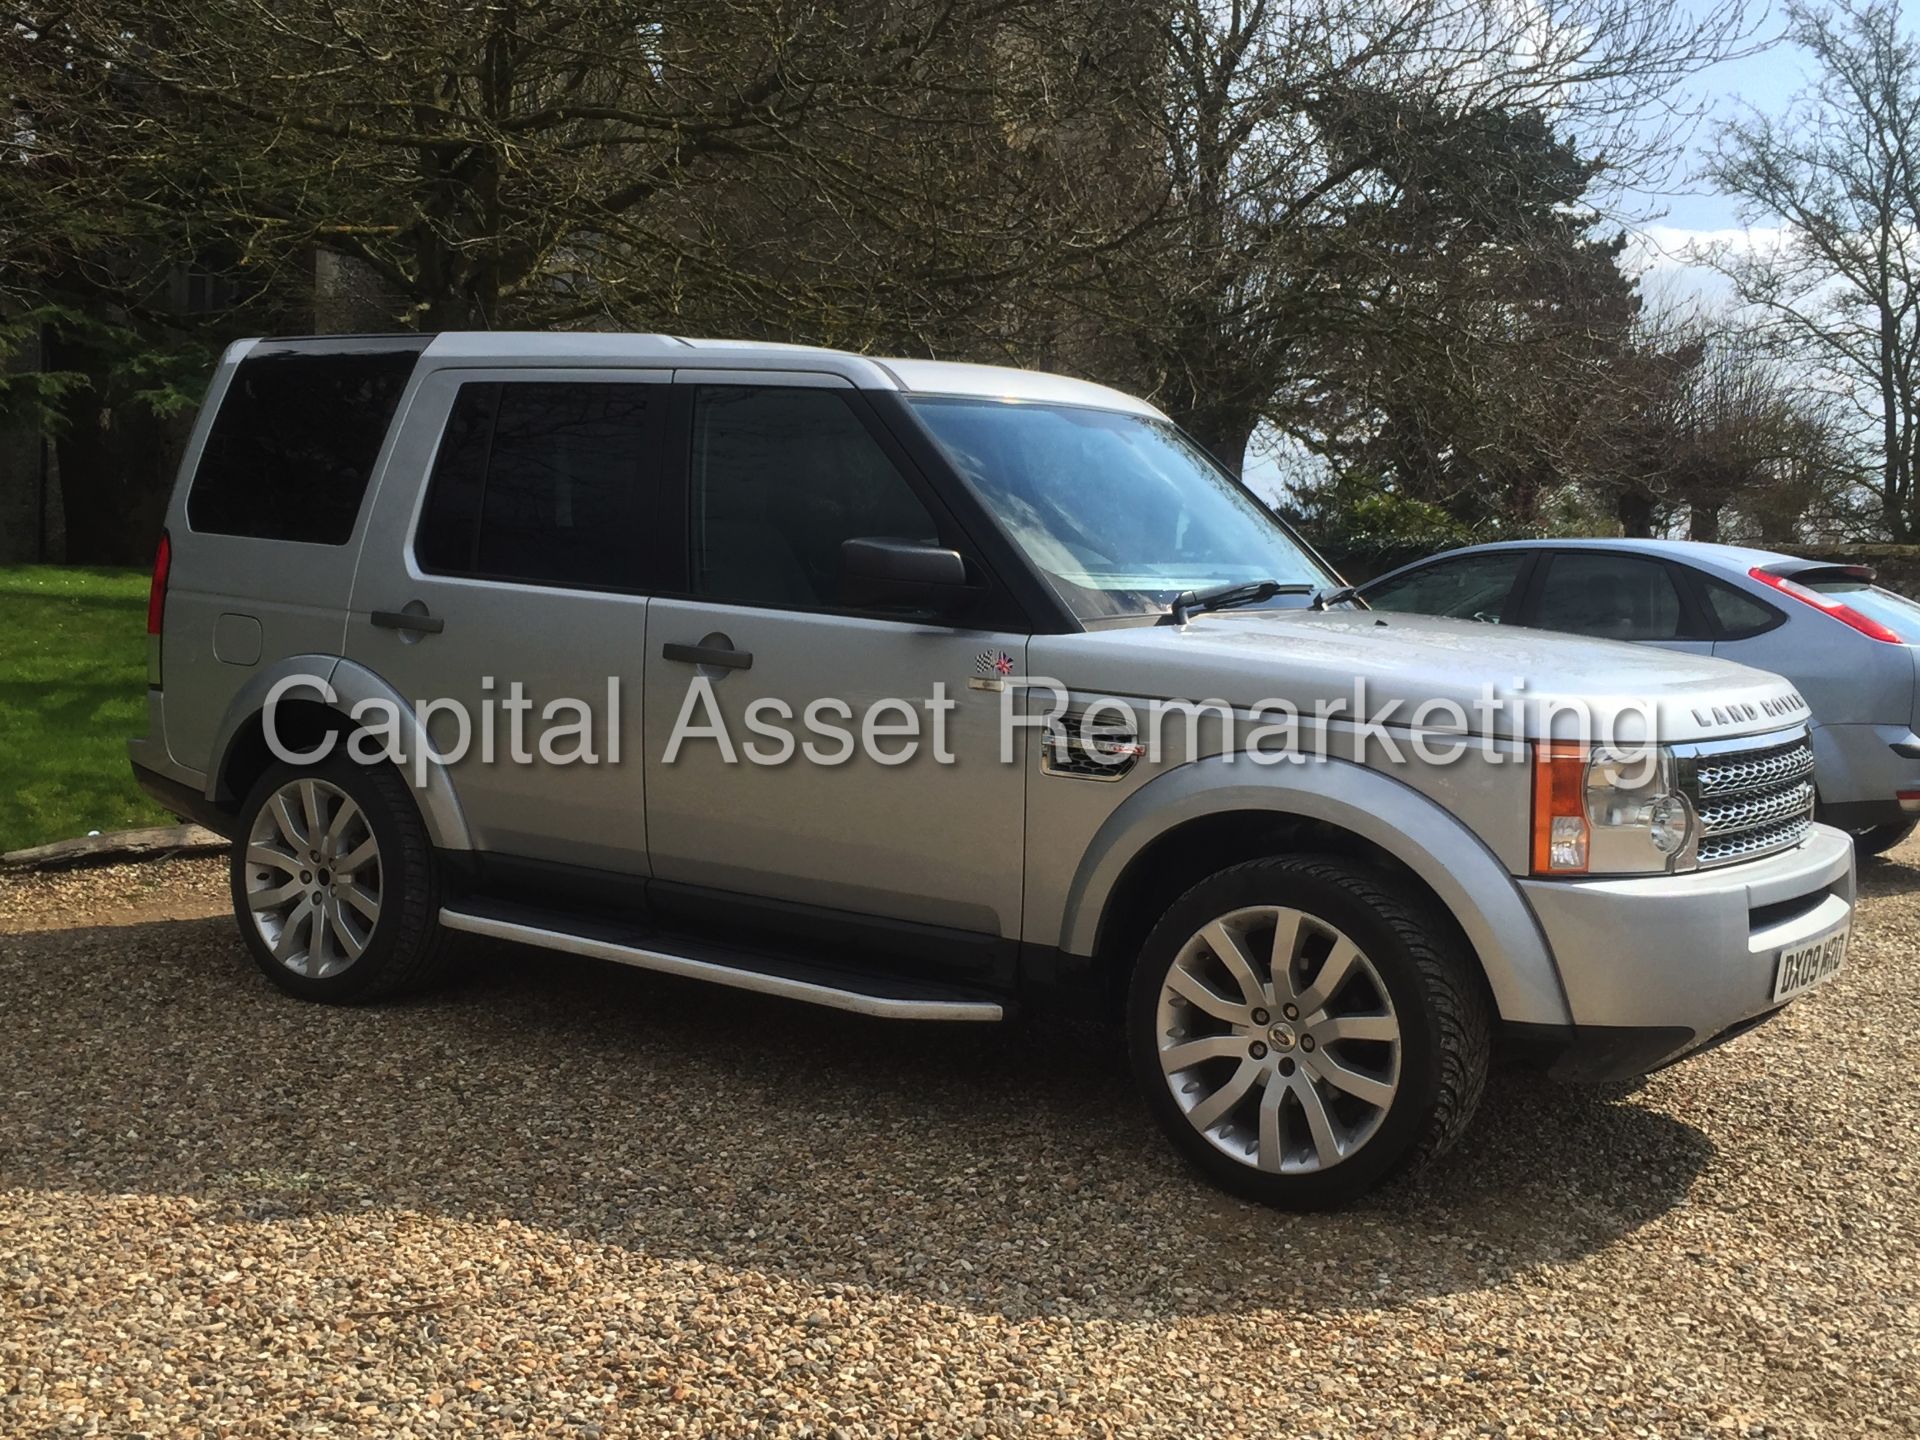 (ON SALE) LAND ROVER DISCOVERY (2009 - 09 REG) 2.7 TDV6 - AUTO - 7 SEATER - AIR SUSPENSION (NO VAT)